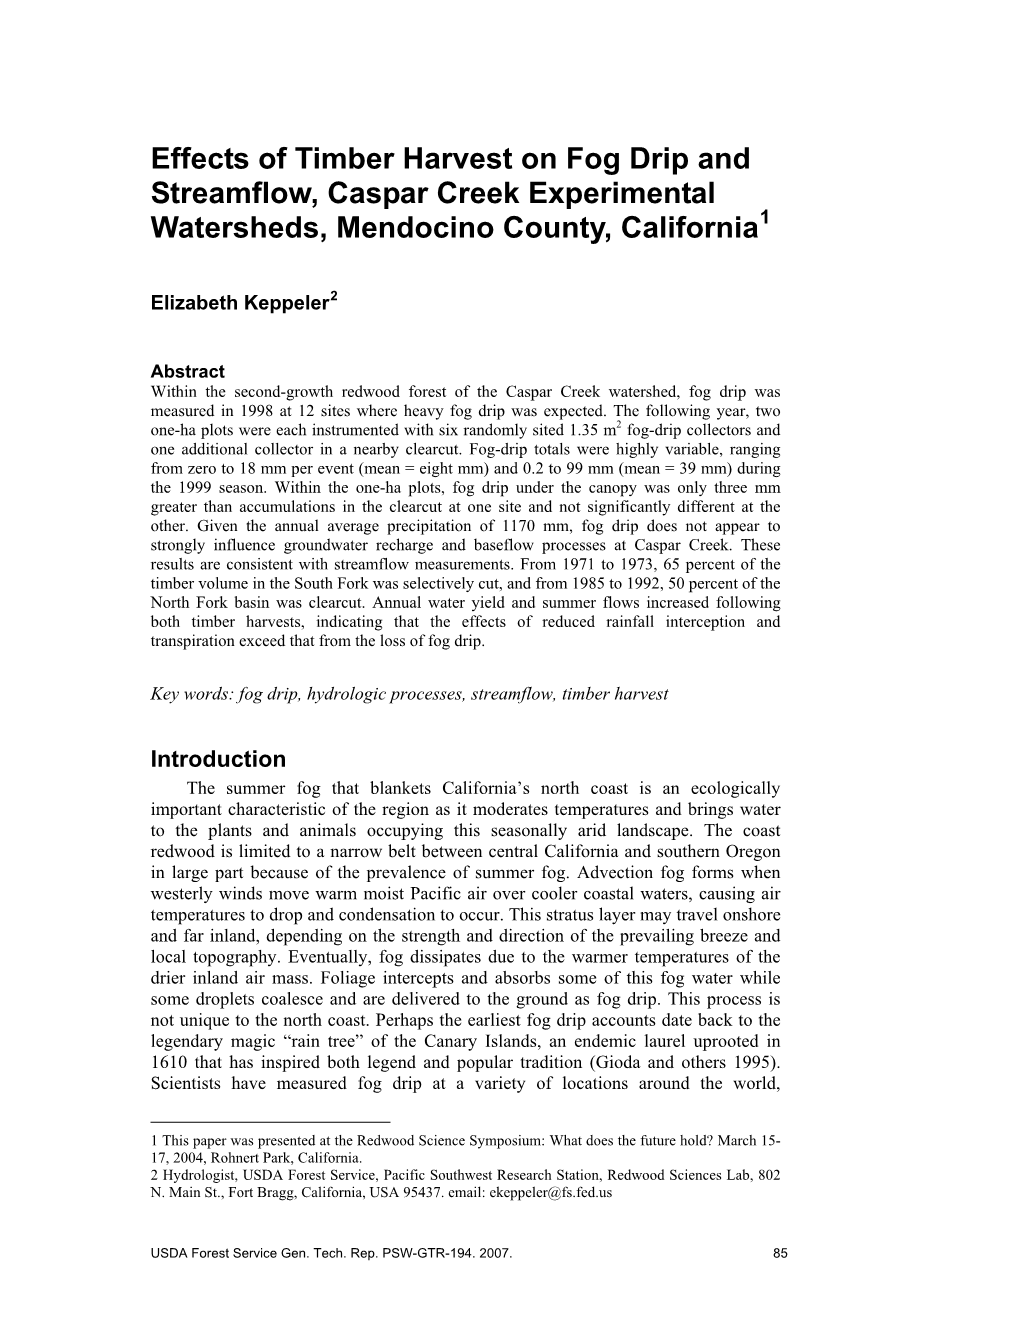 Effects of Timber Harvest on Fog Drip and Streamflow, Caspar Creek Experimental Watersheds, Mendocino County, California1